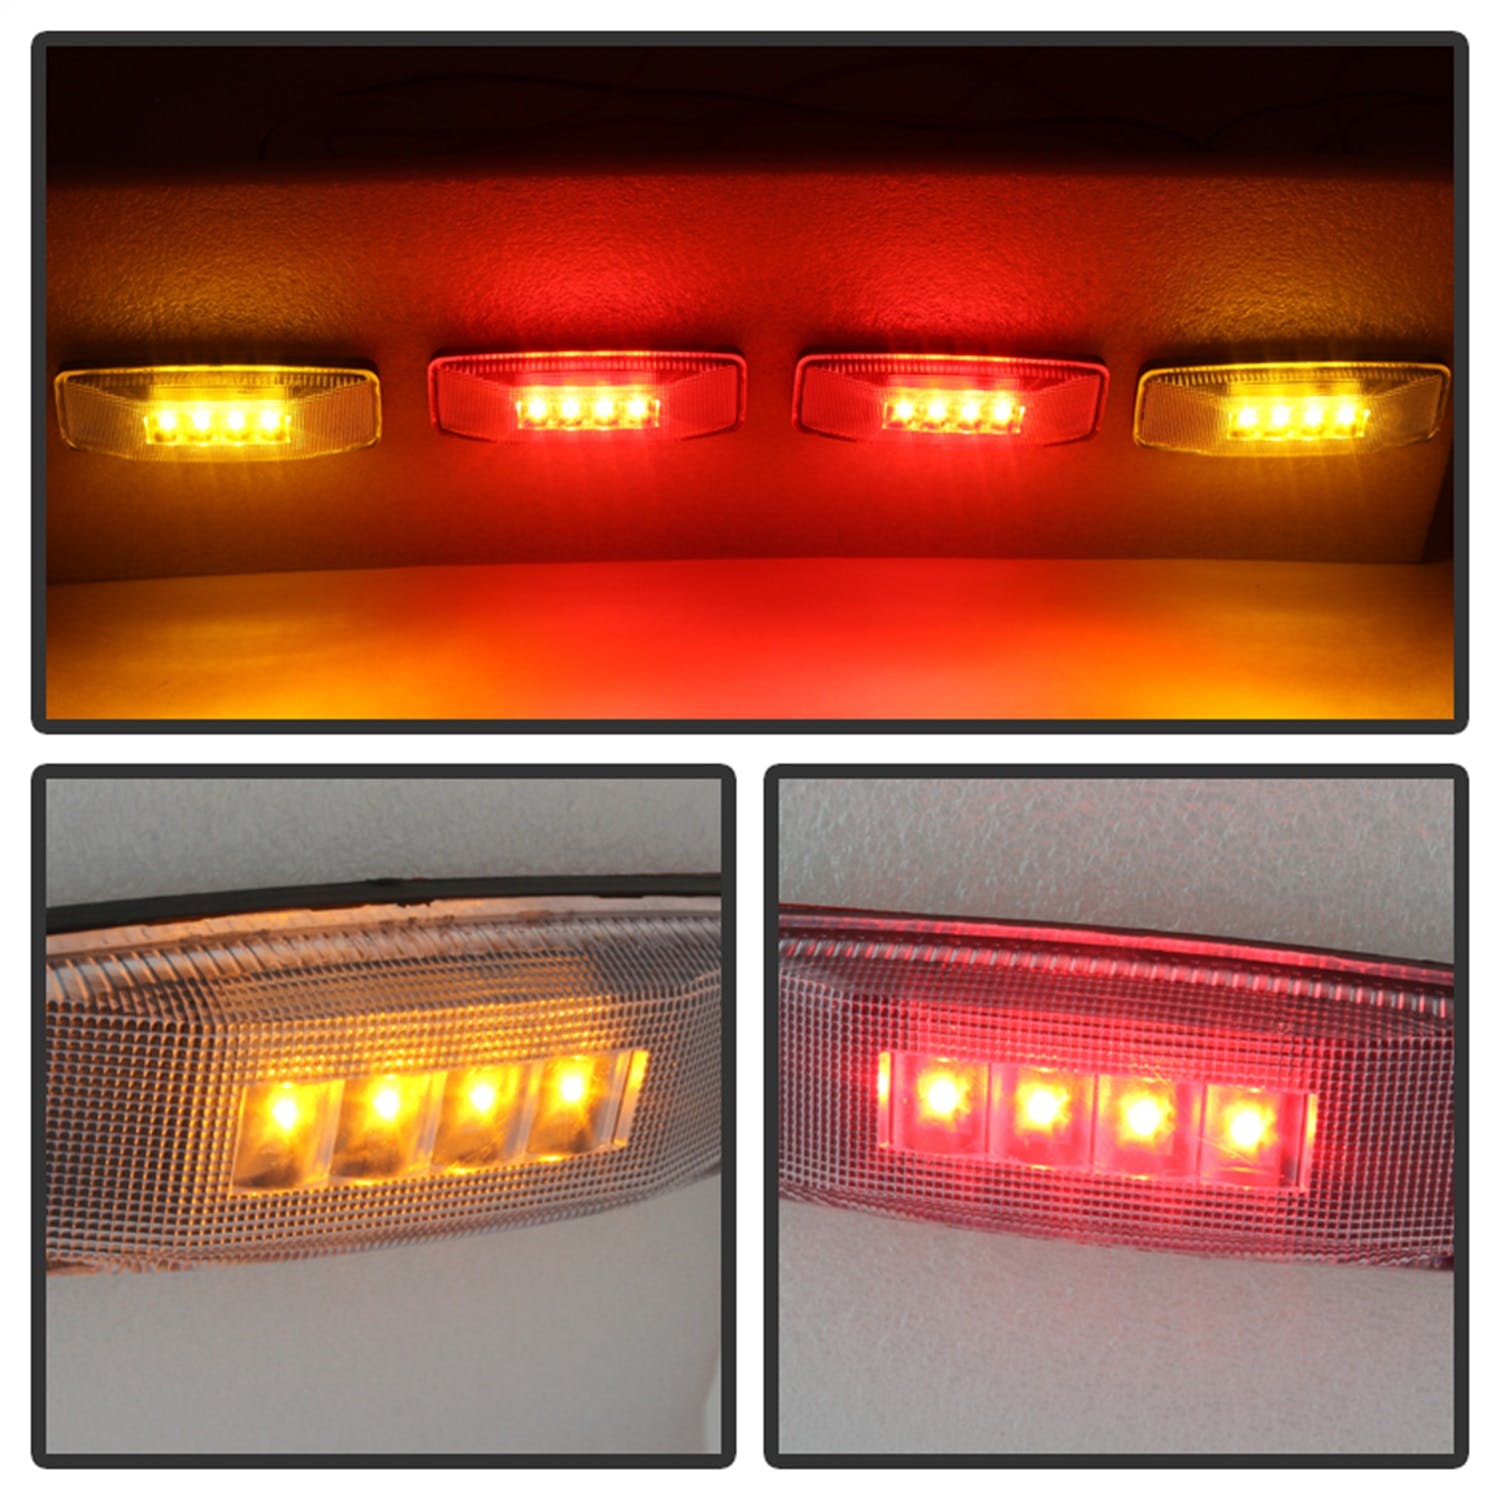 XTUNE POWER 9924699 Dodge Ram 94 02 Duy 2 Red LED2 Amber LED Fender Lights 4pcs Clear